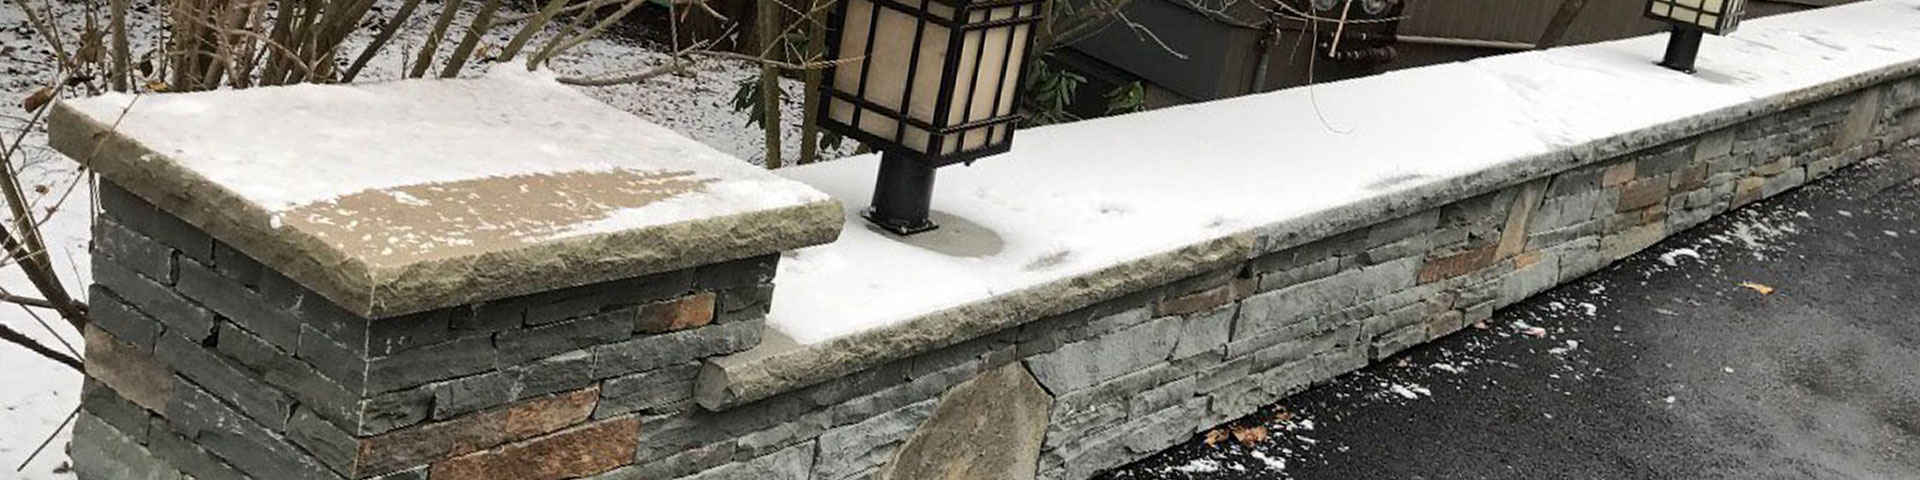 natural stone landscaping wall with snow on it